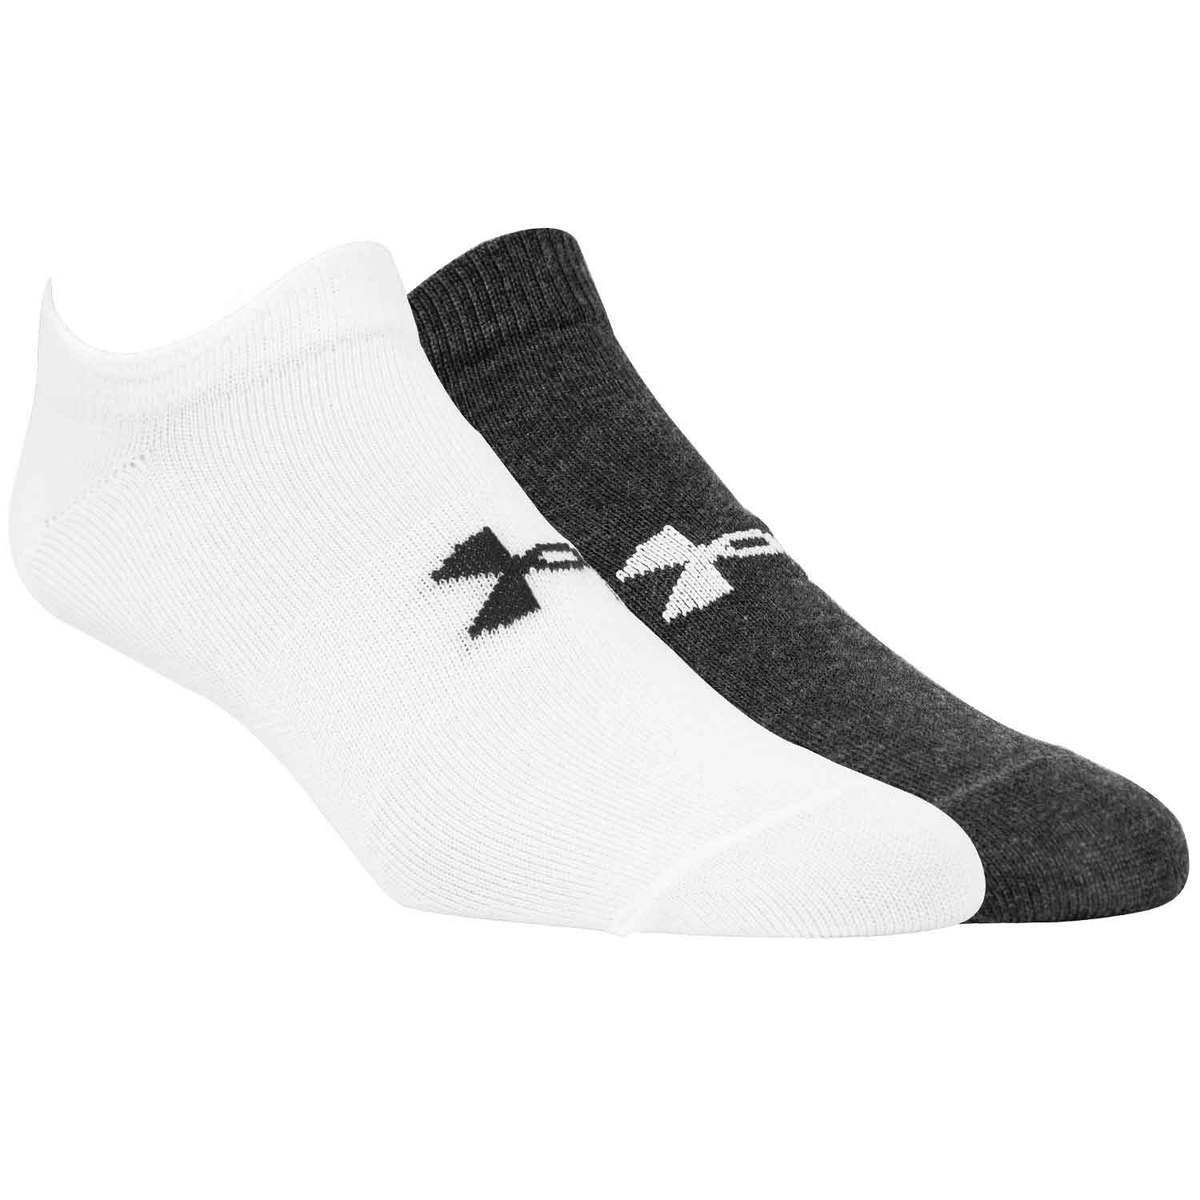 Under Armour Women's Essentials 6 Pack Casual Socks - Black/White ...